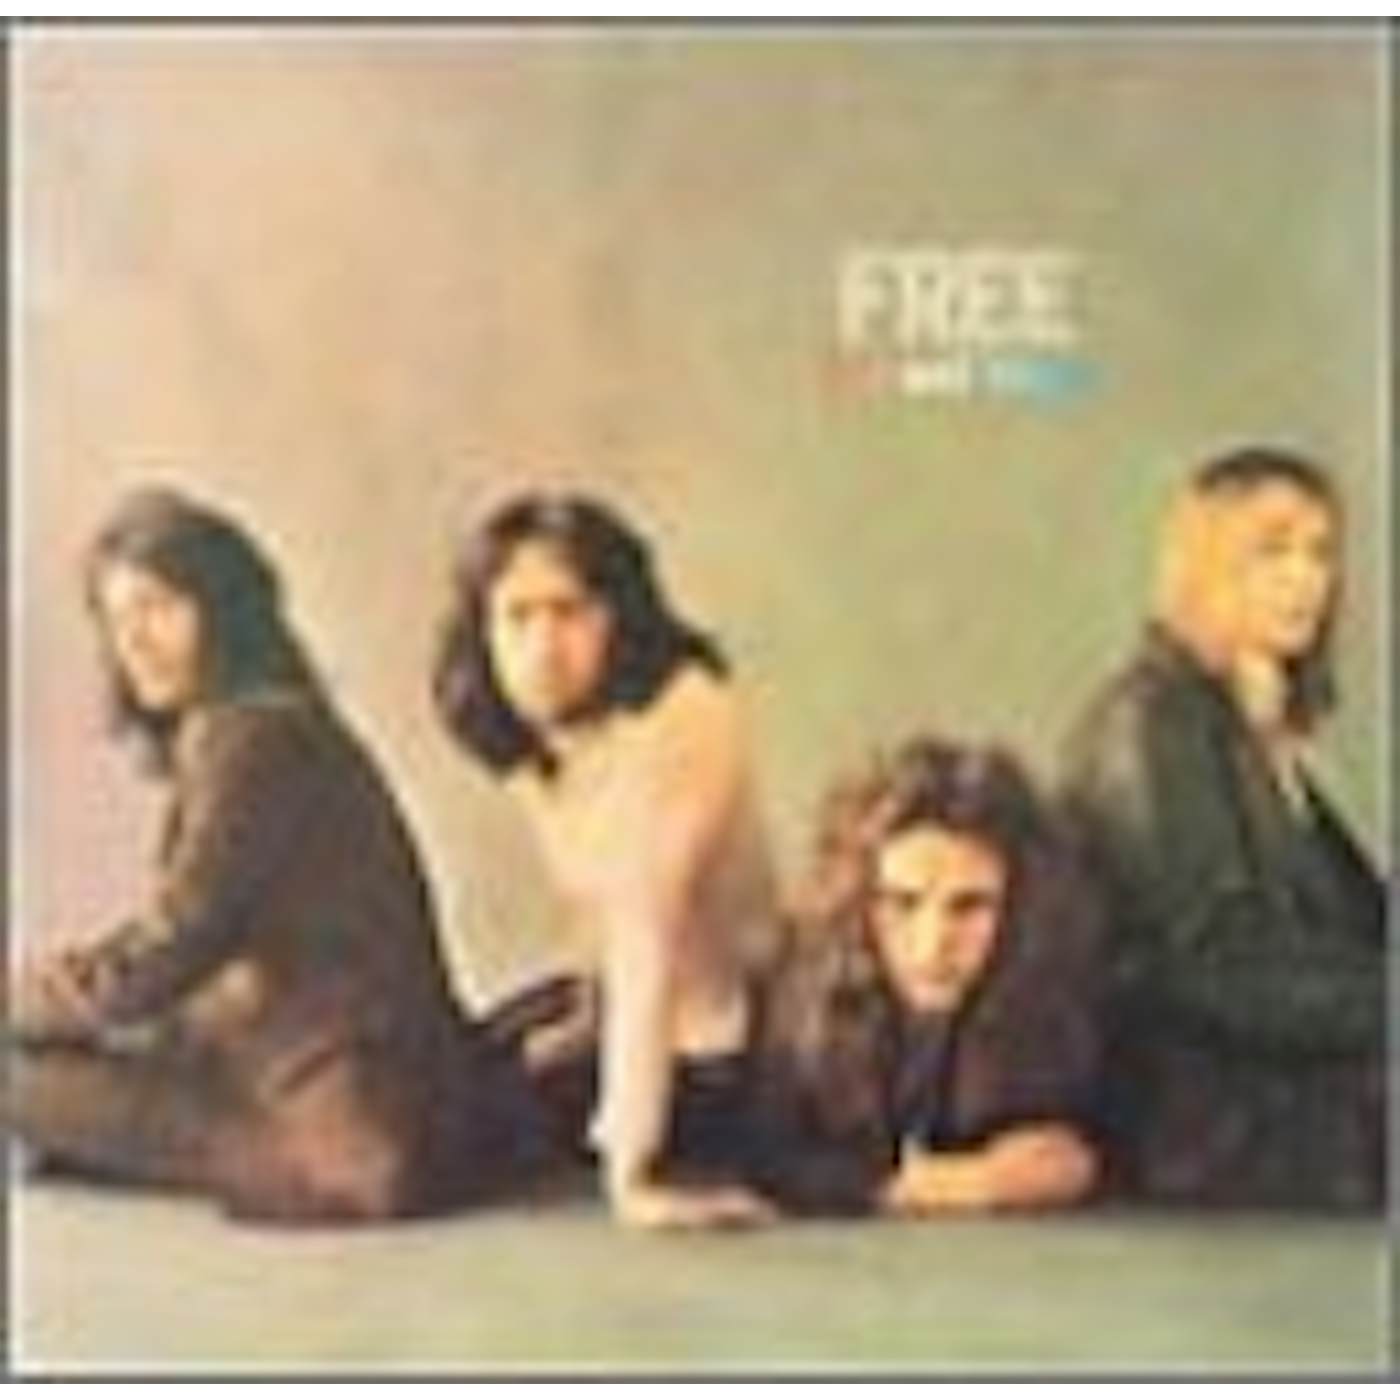 Free FIRE & WATER CD